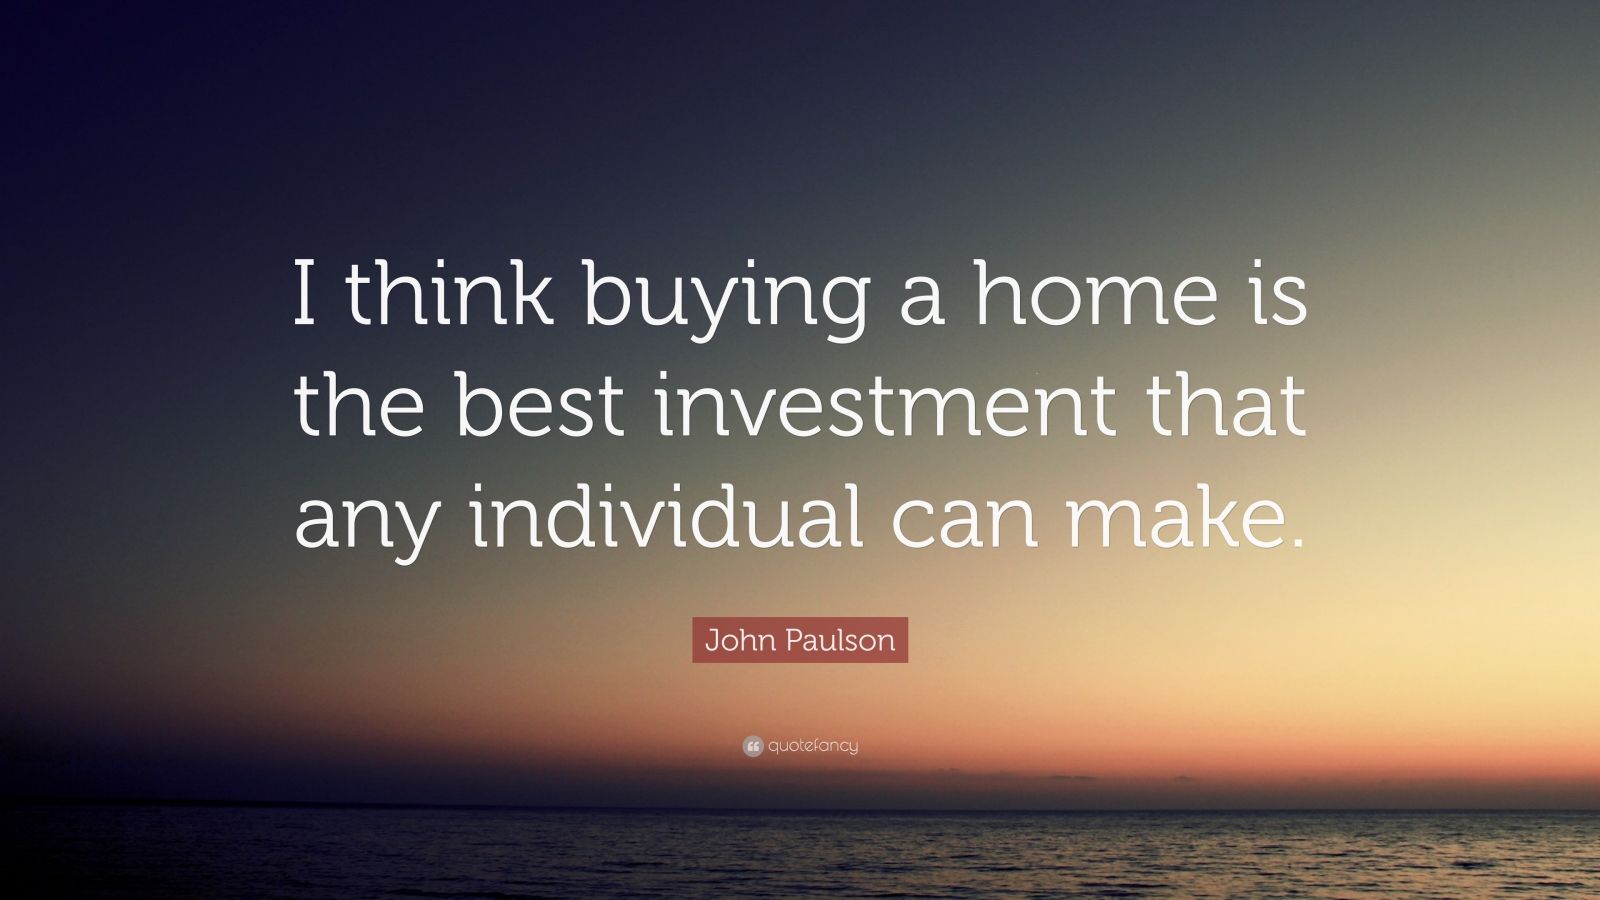 John Paulson Quote: “I think buying a home is the best investment that